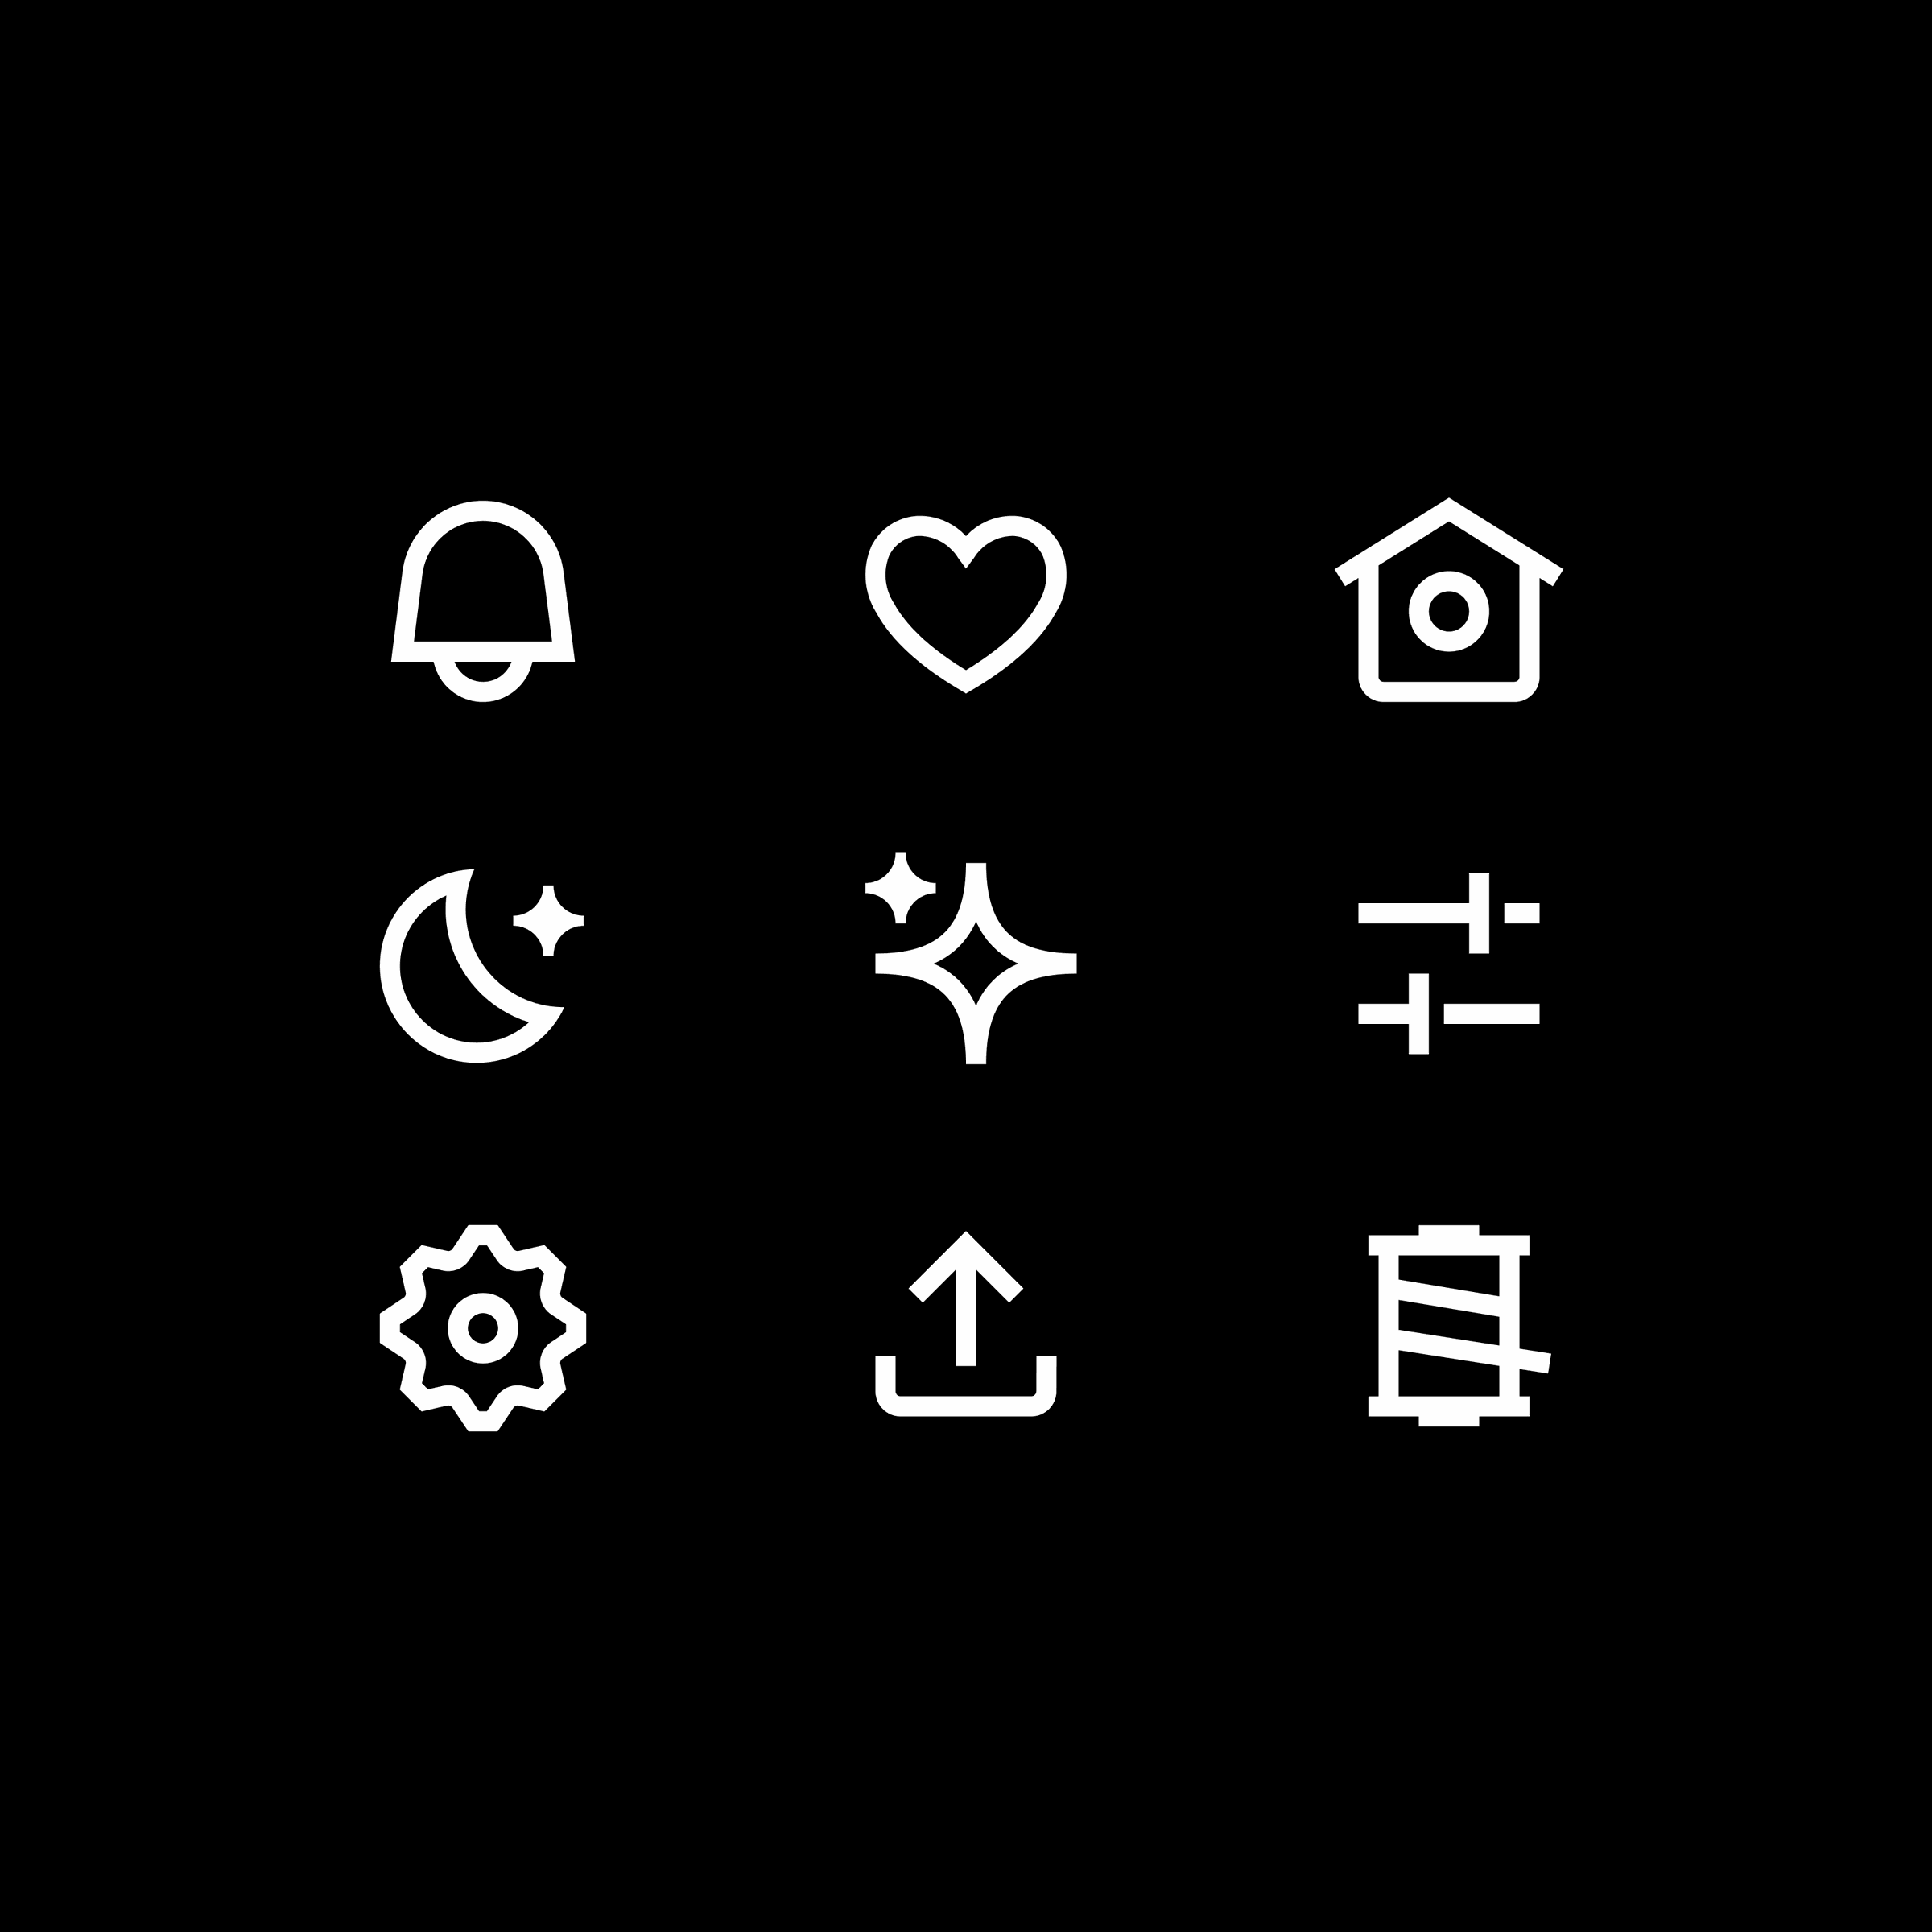 Some of Twitter’s new icons in white on a black background.